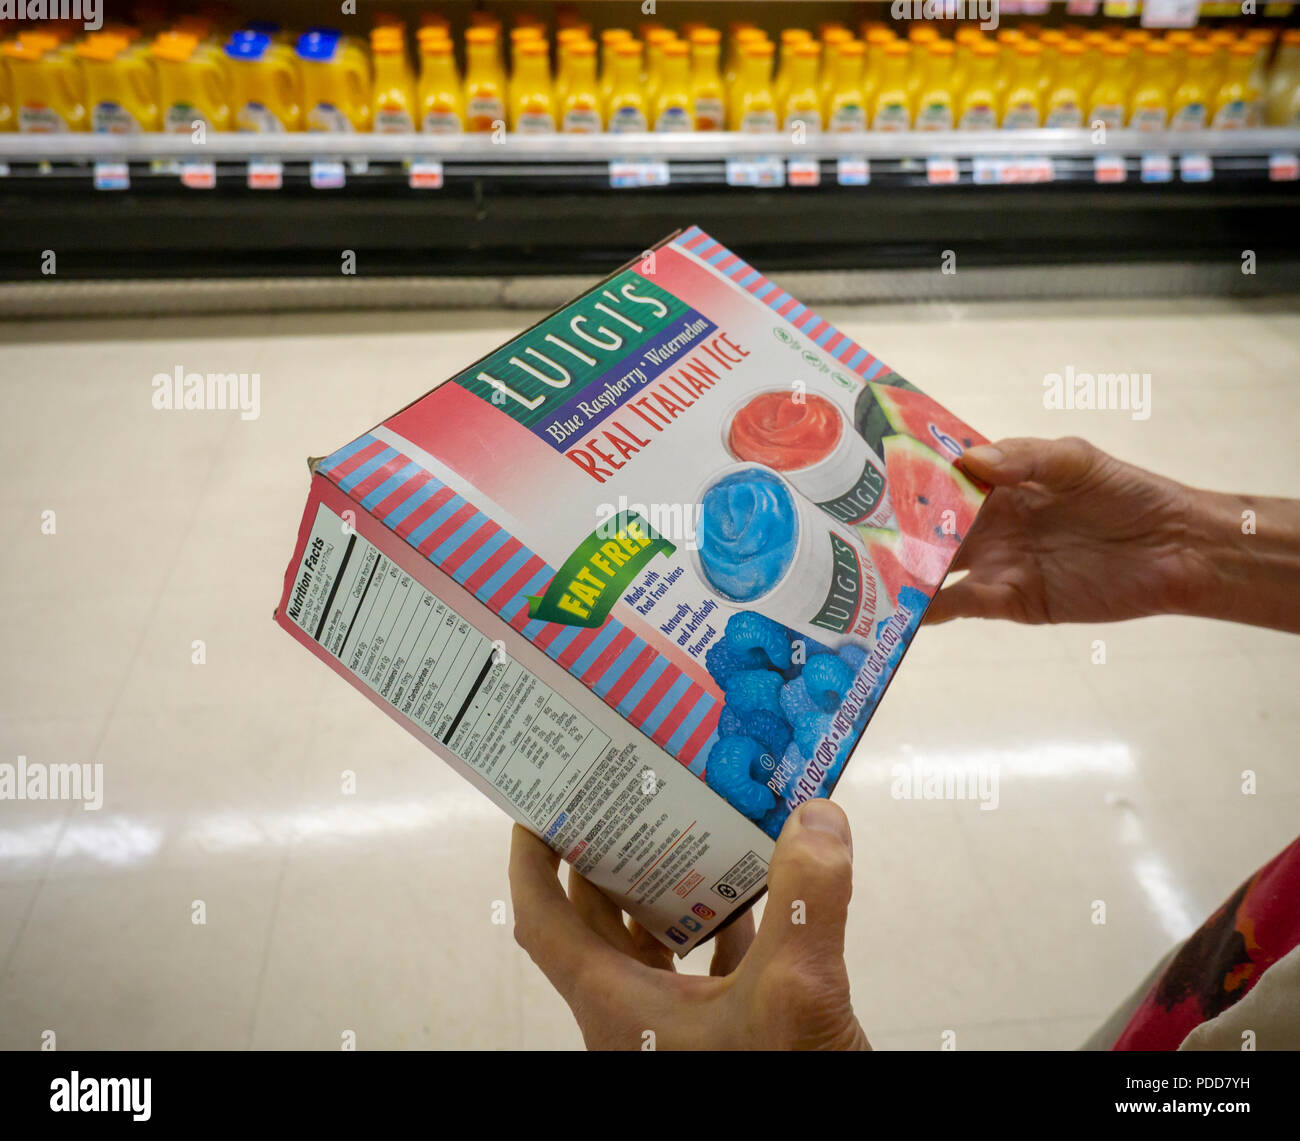 A shopper in a supermarket in New York chooses a package of Luigi's Italian Ices, a brand of J&J Snack Foods on Monday, July 30, 2018. J&J Snack Foods recently reported fiscal third-quarter profits that beat analysts' expectations. The company has reported net sales that increased every quarter for 46 years.  (© Richard B. Levine) Stock Photo